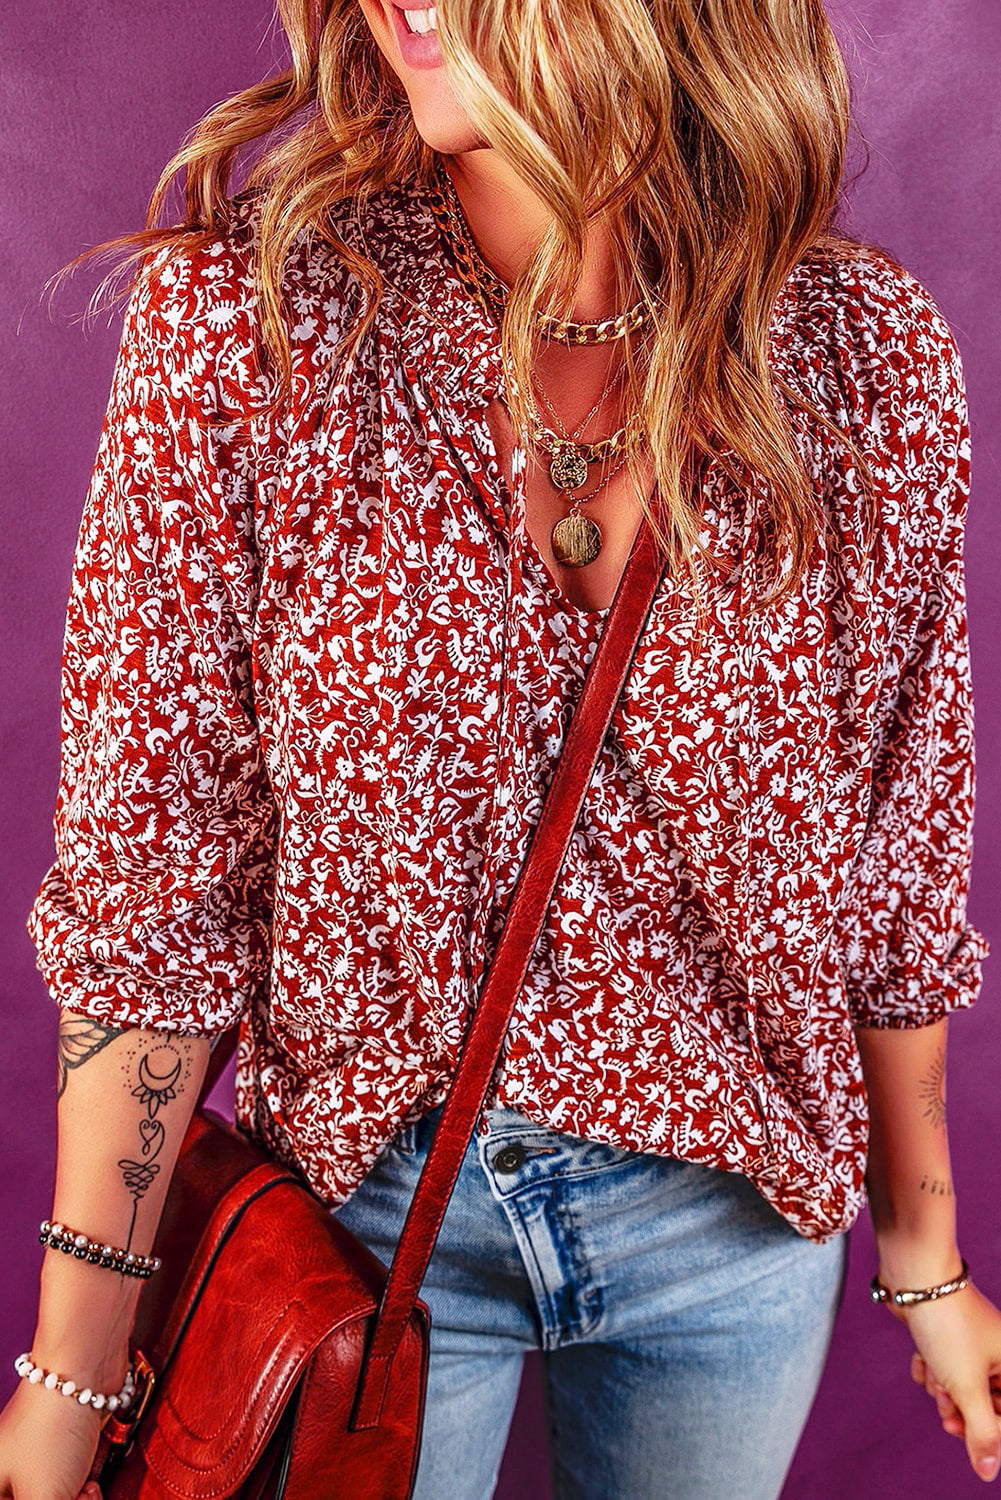 Cali Chic Biking Red Floral Print Smocked Tie Neck Blouse